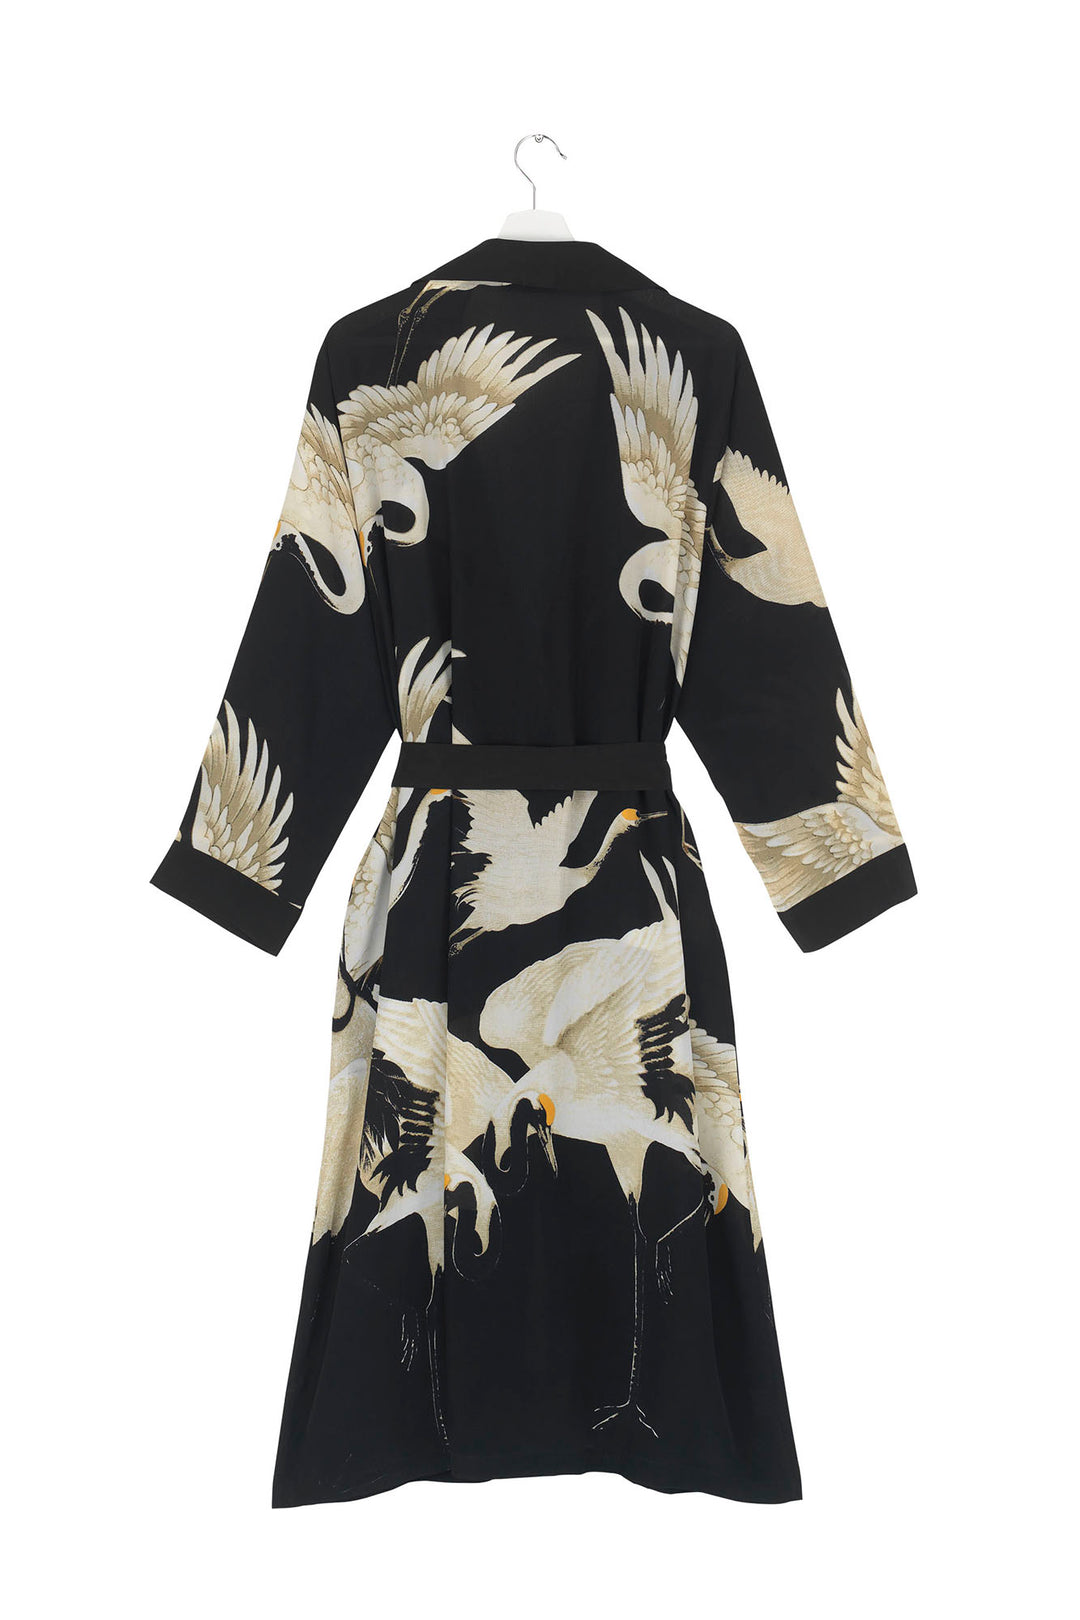 ladies crepe dressing gown black background with stork bird print by One Hundred Stars